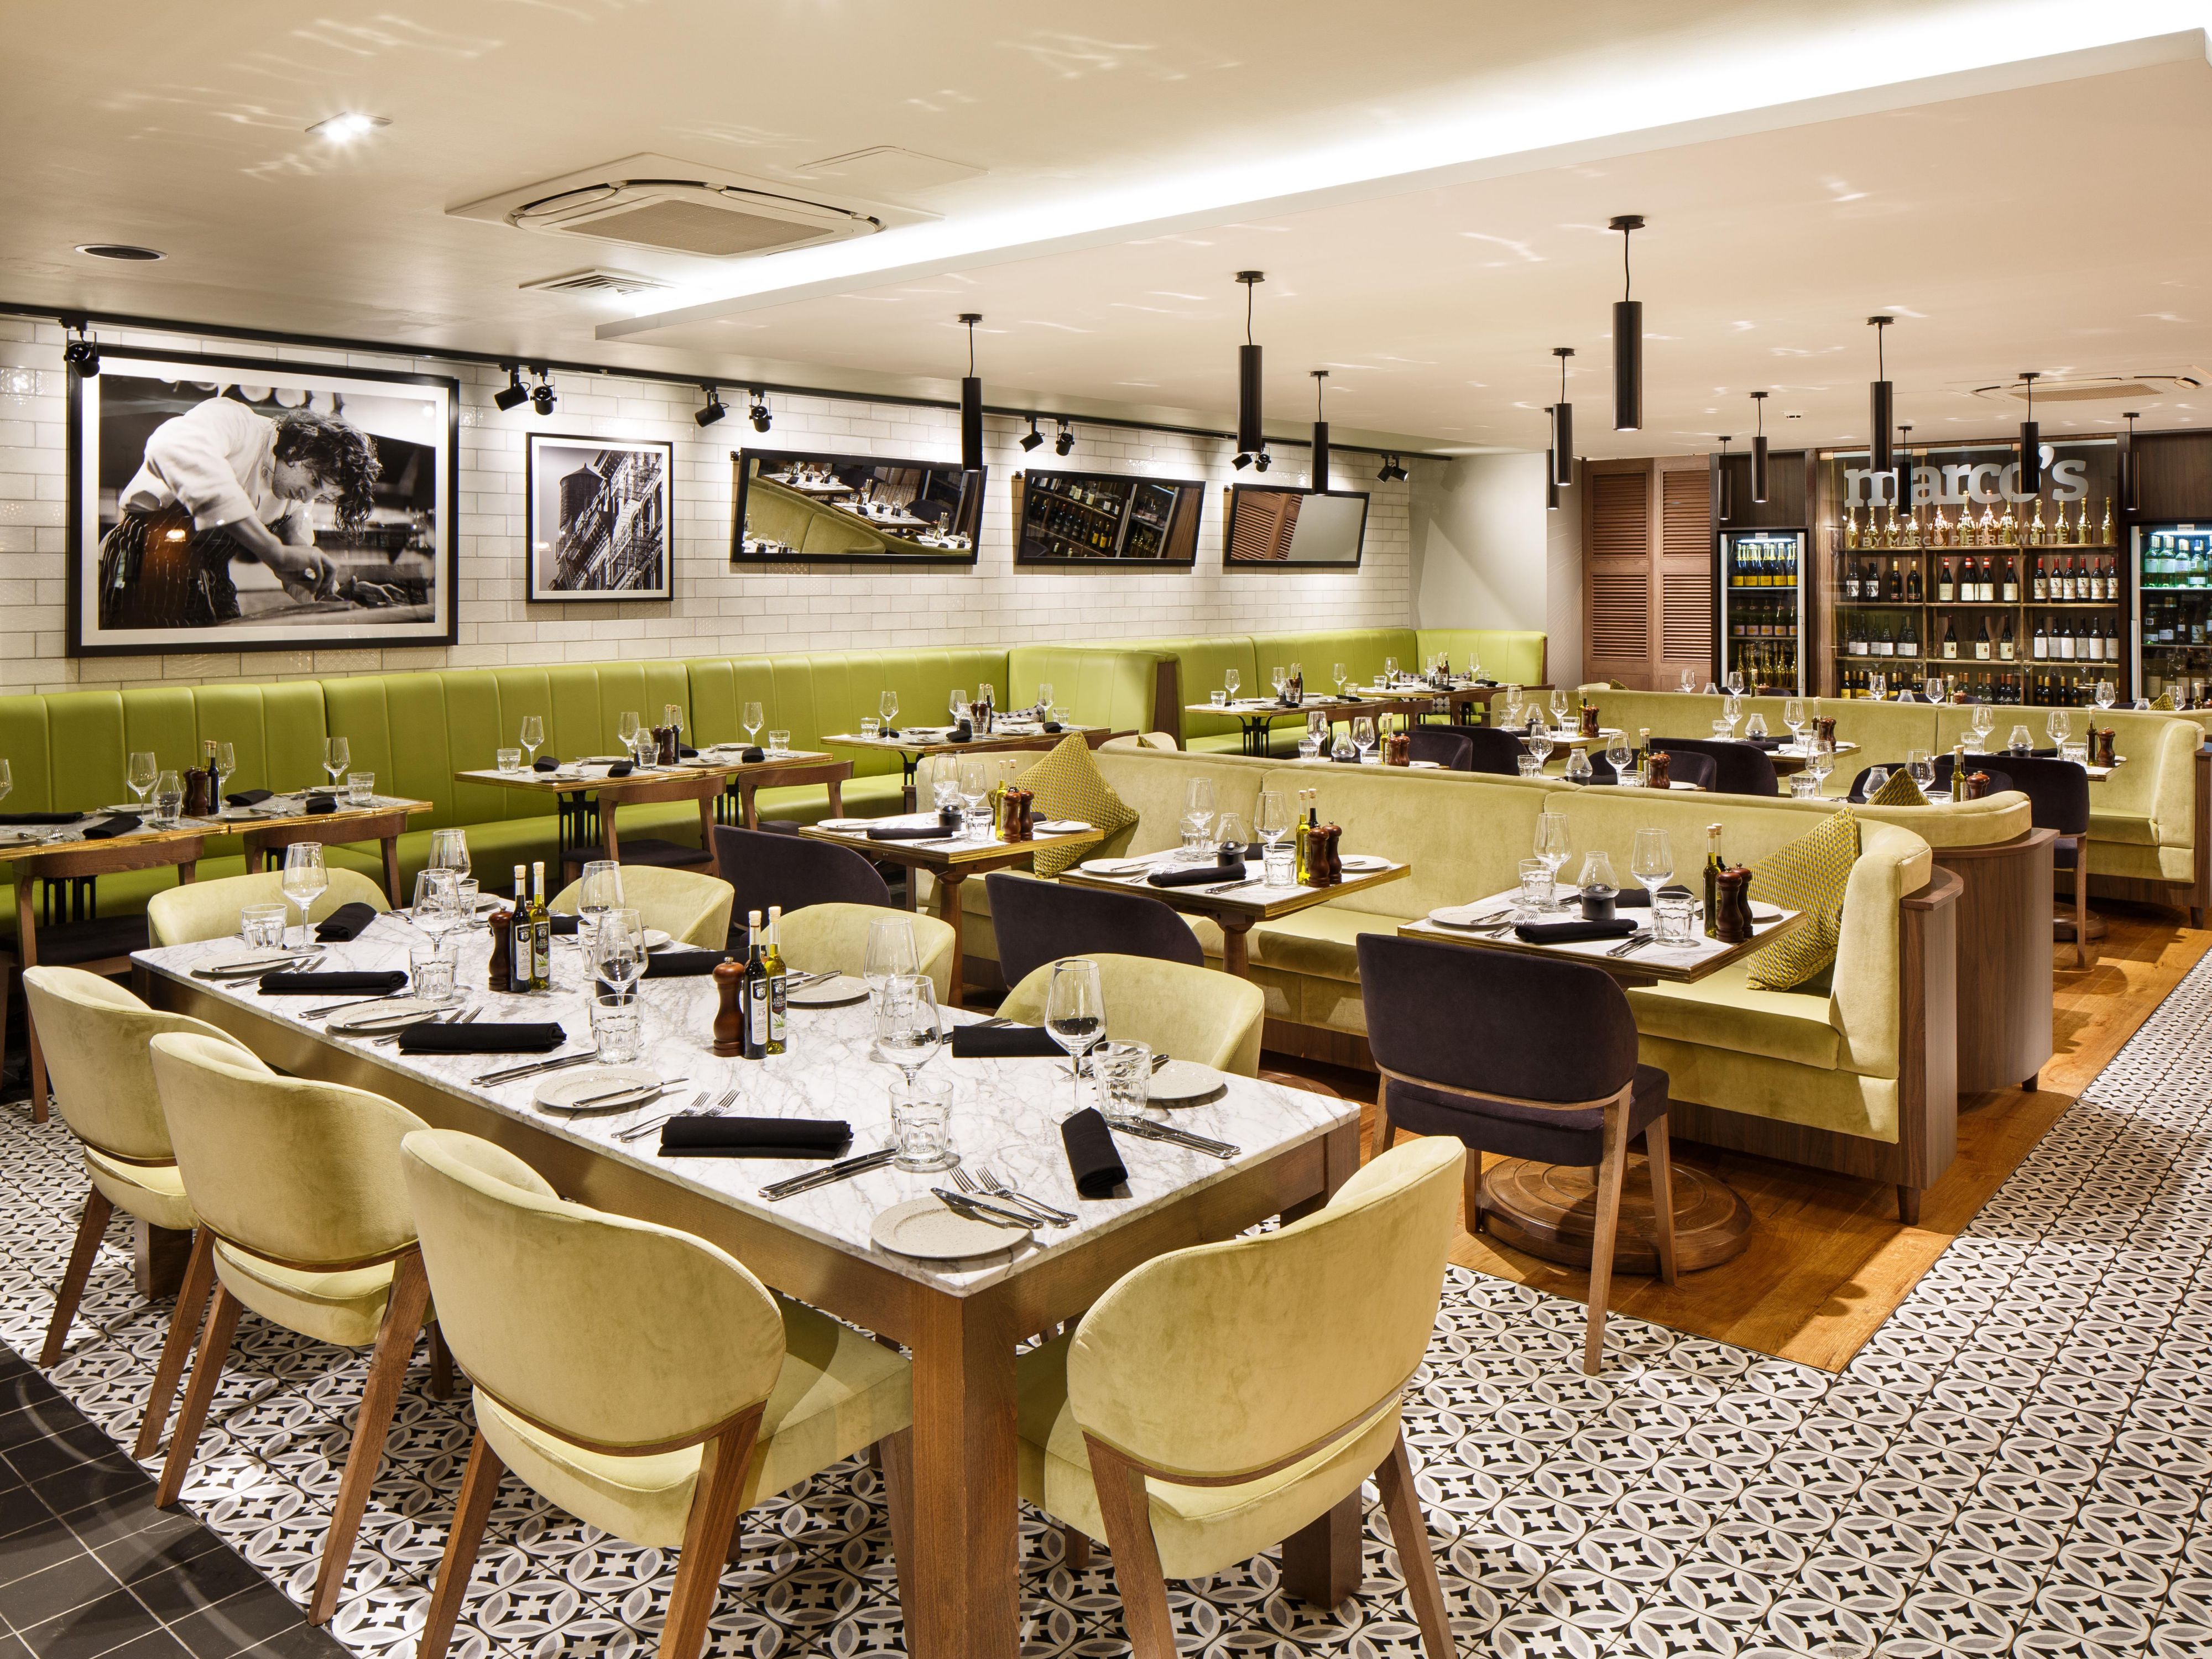 Book a table at Marco’s New York Italian Restaurant, perfect for dinner, light bites or cocktails, all within the comfort of your hotel. 